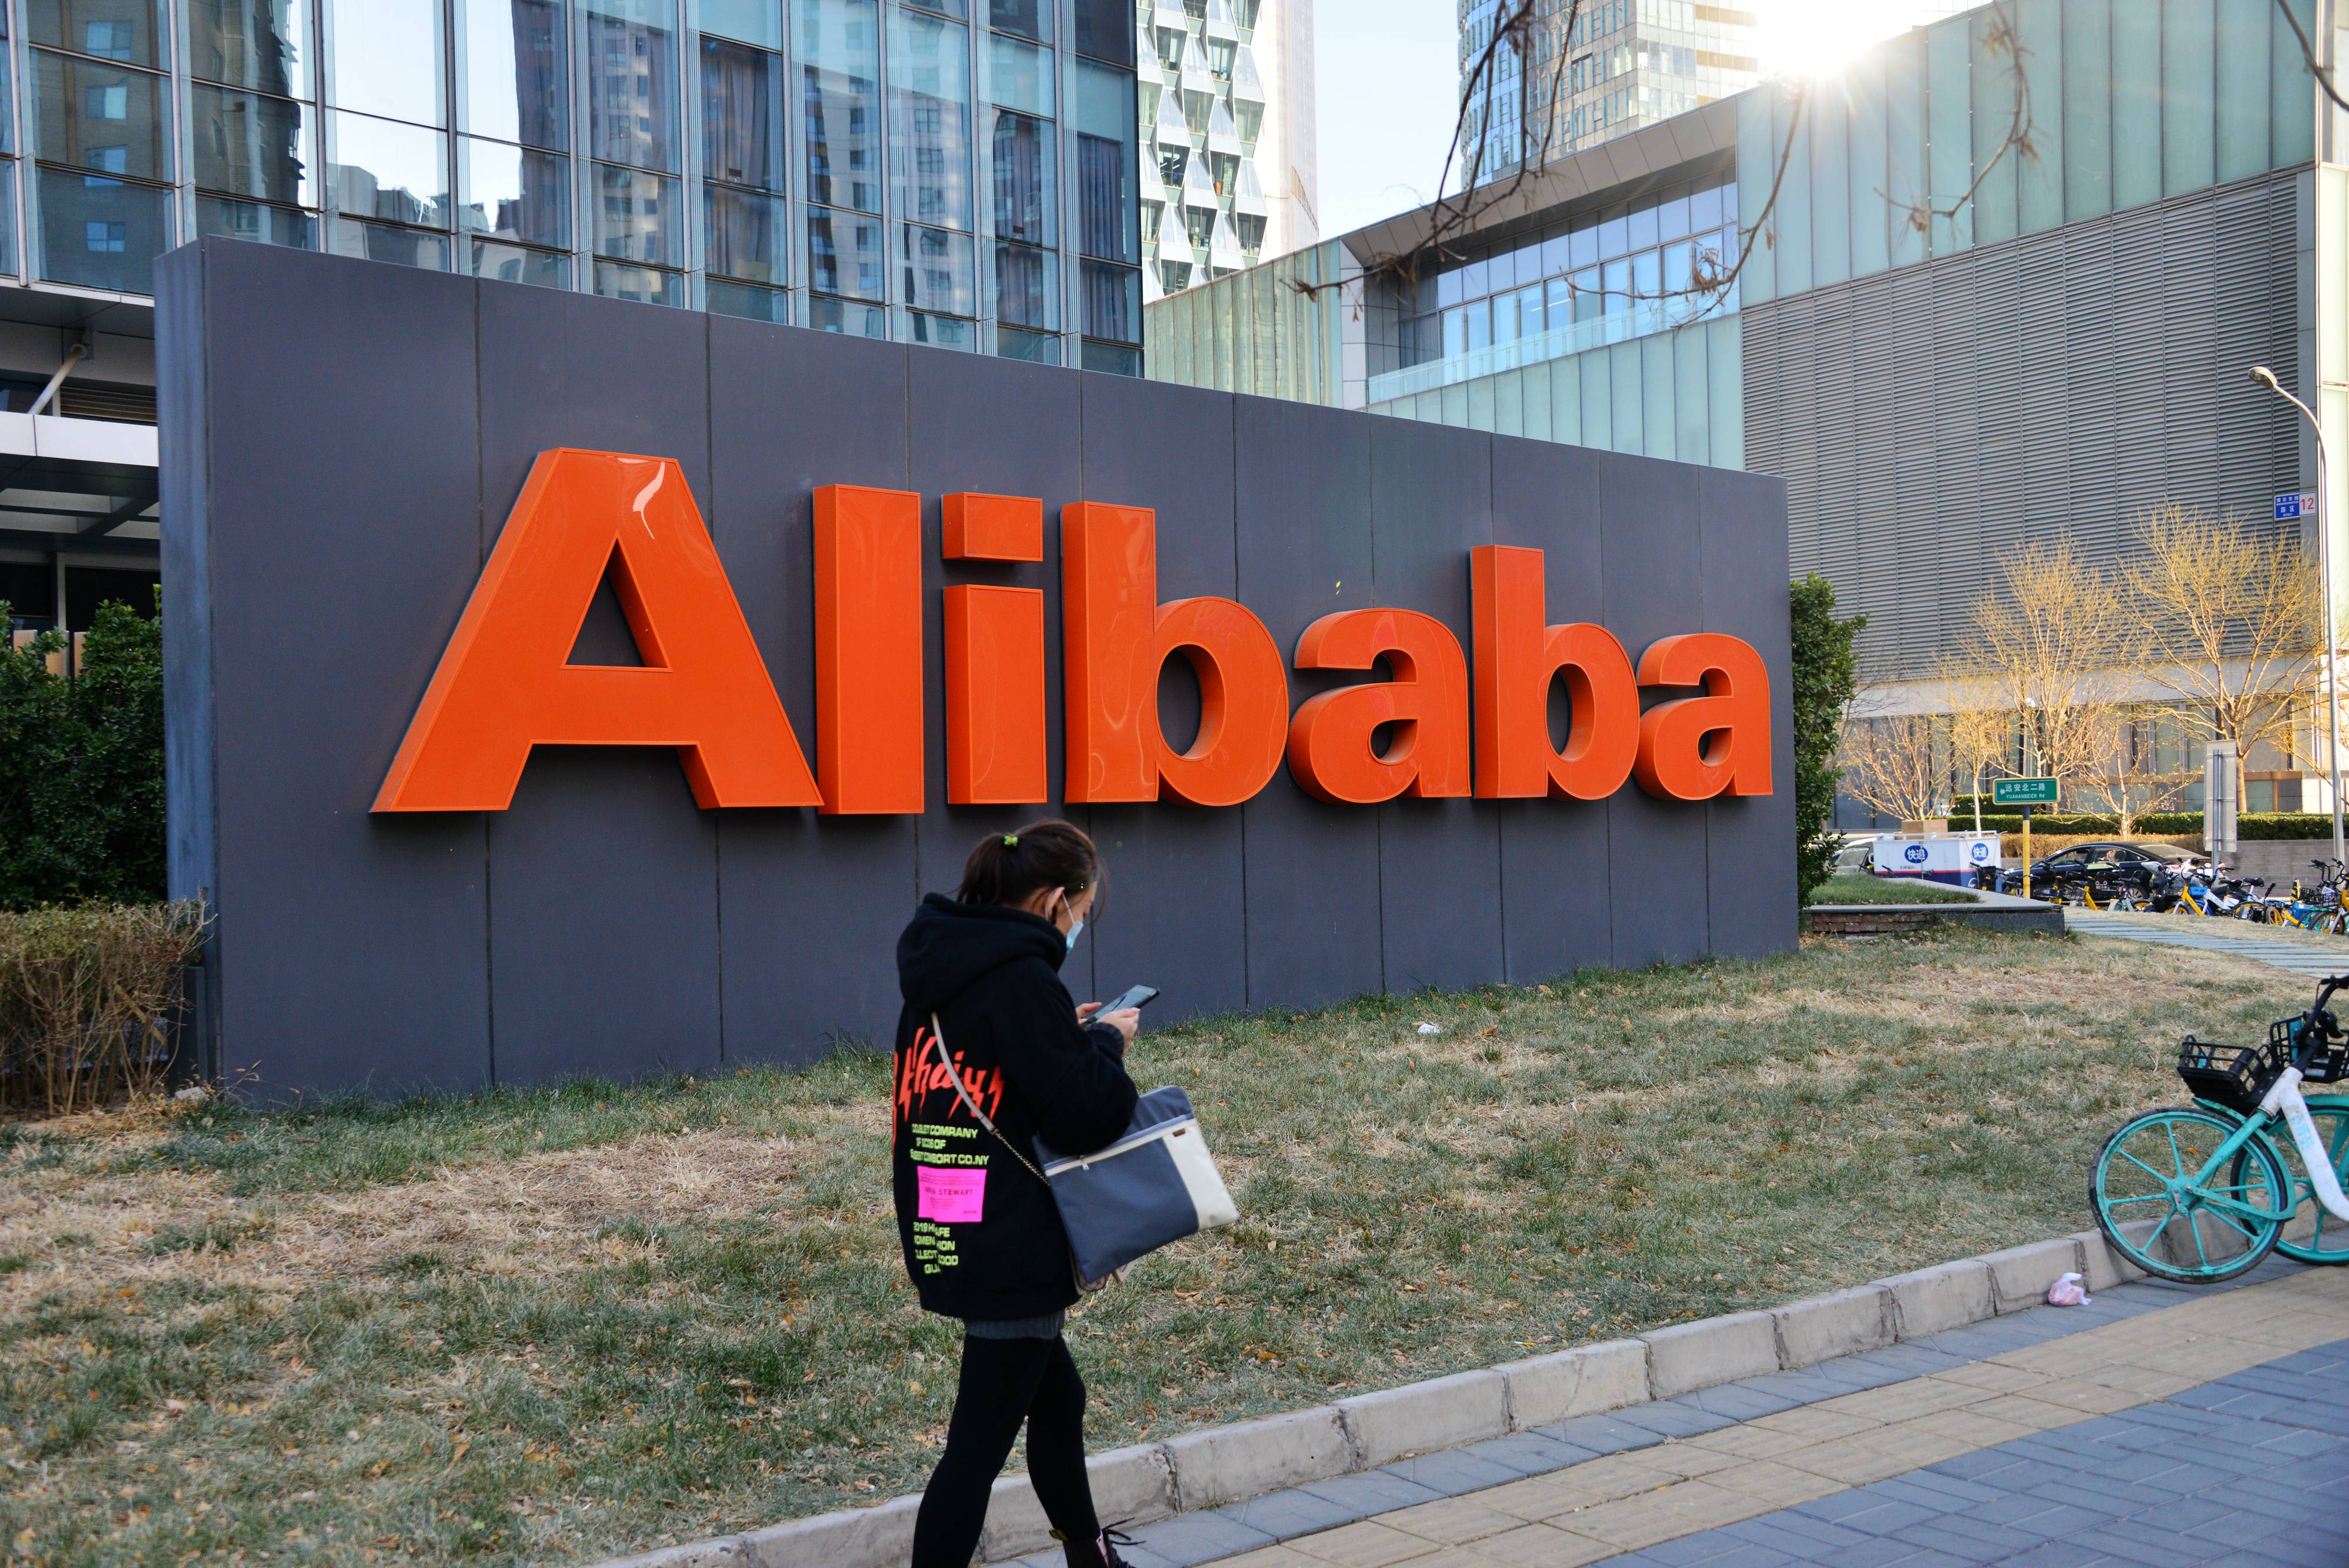 Alibaba introduces new measures to prevent sexual assault